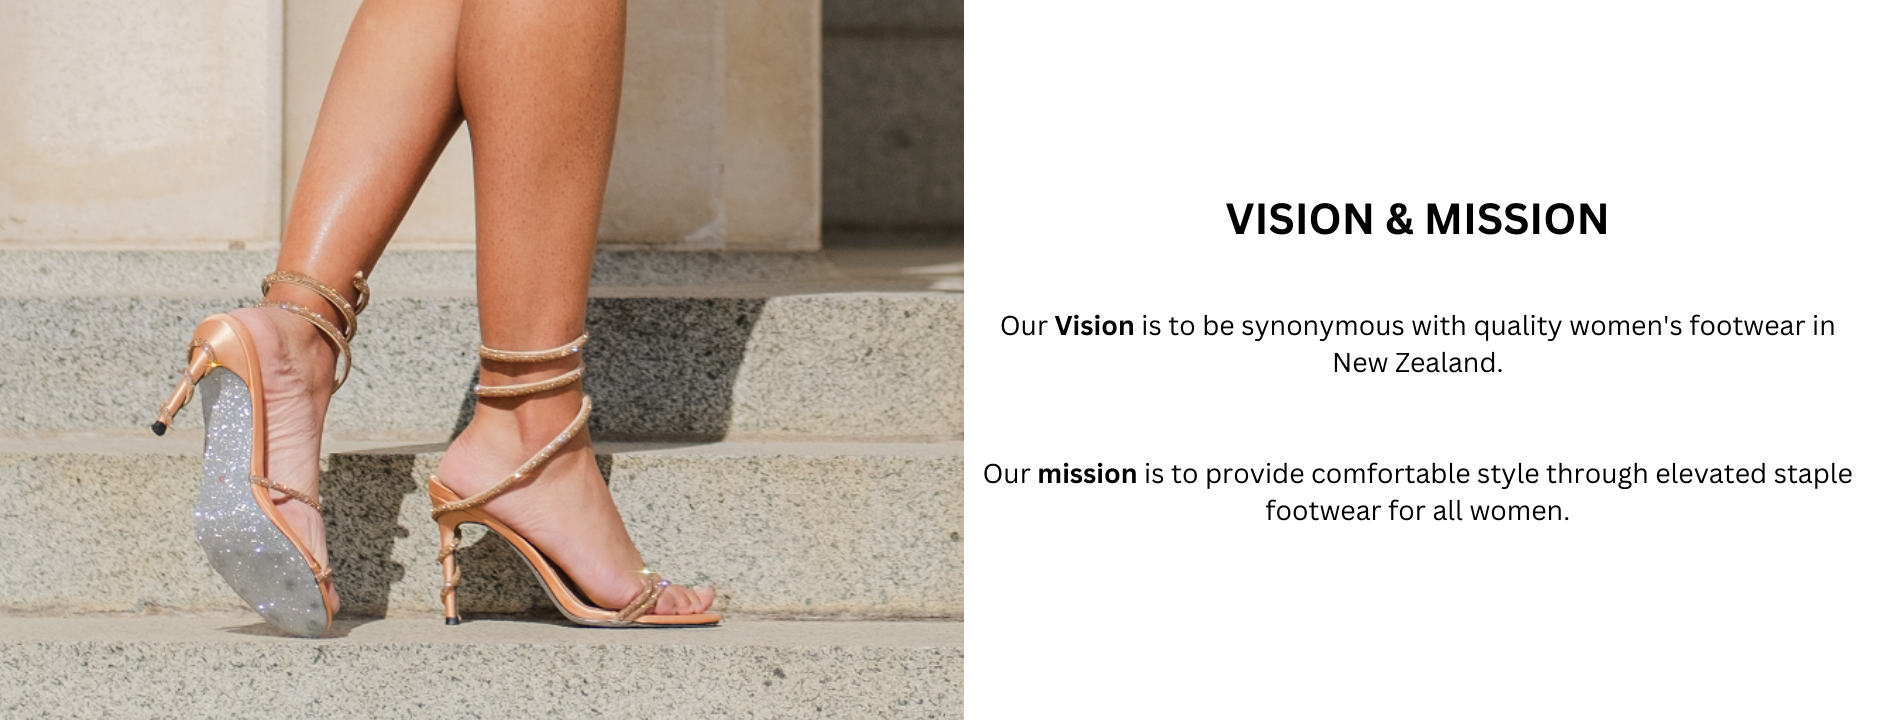 Sole shoes vision and mission